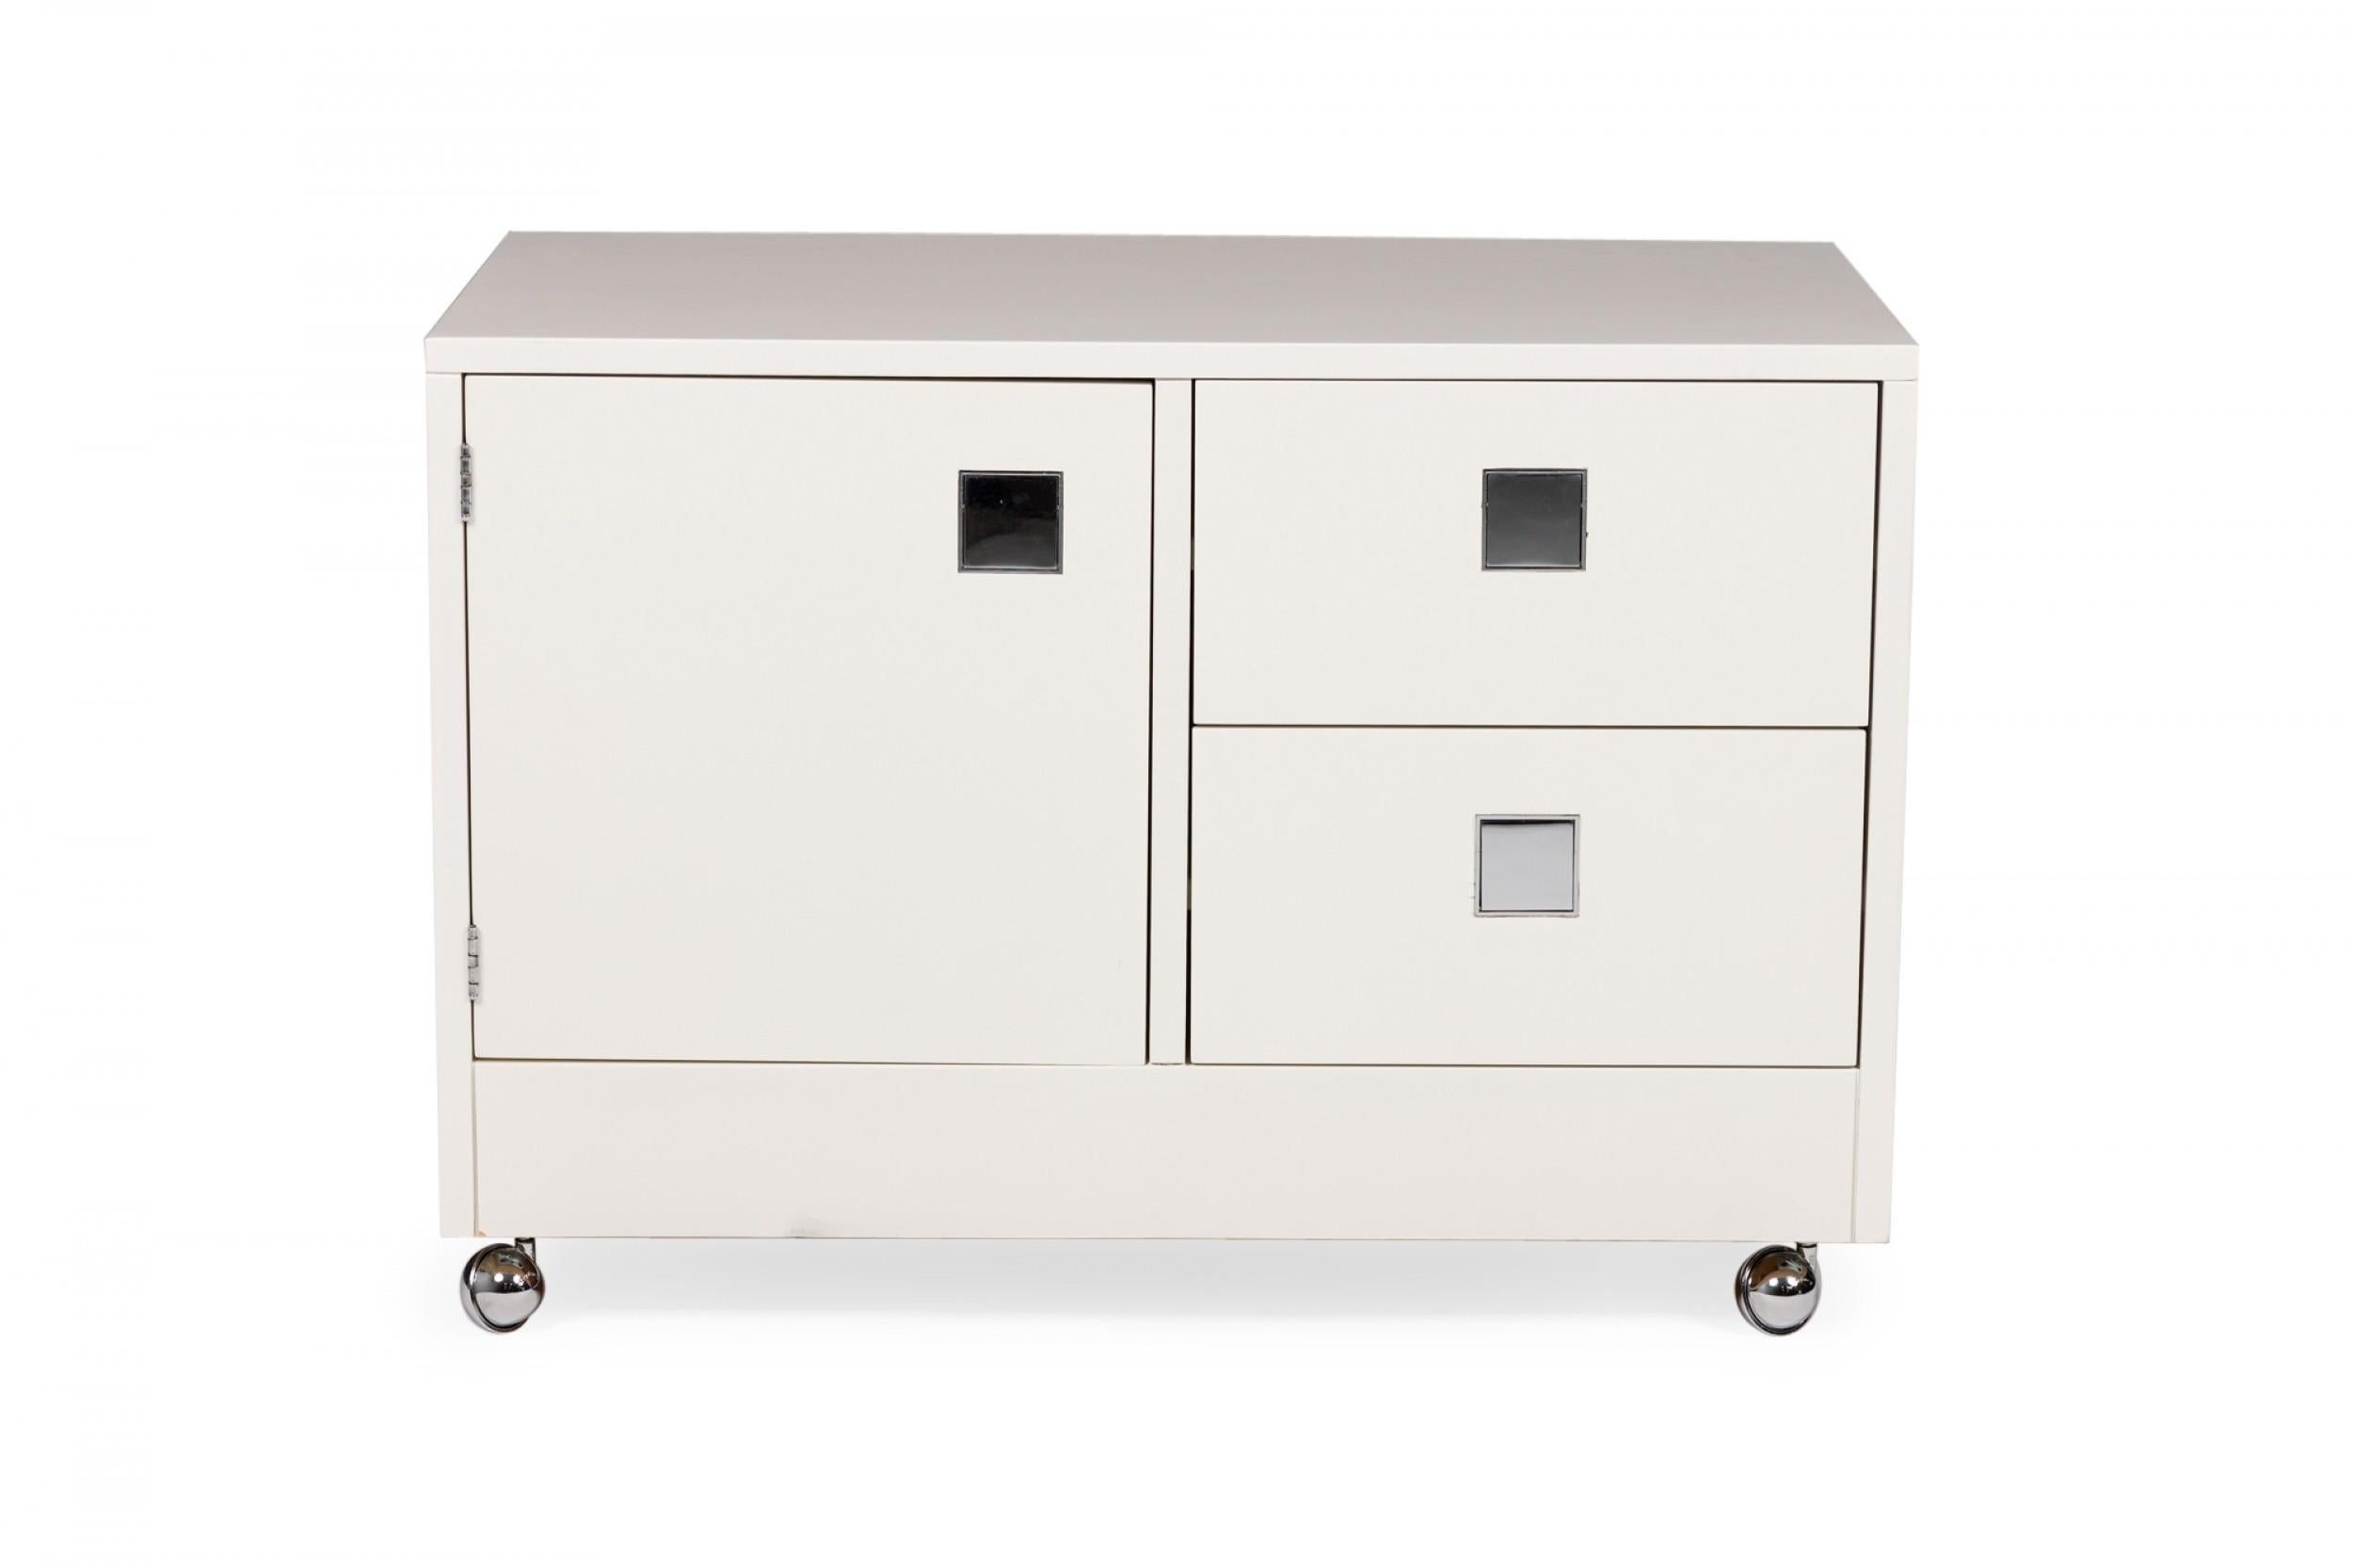 PAIR of American Mid-Century white laminate bedside tables / commodes with one large cabinet and two adjacent drawers, each with a square chrome inset, resting on four silver ball casters. (DIRECTIONAL)(PRICED AS PAIR)
